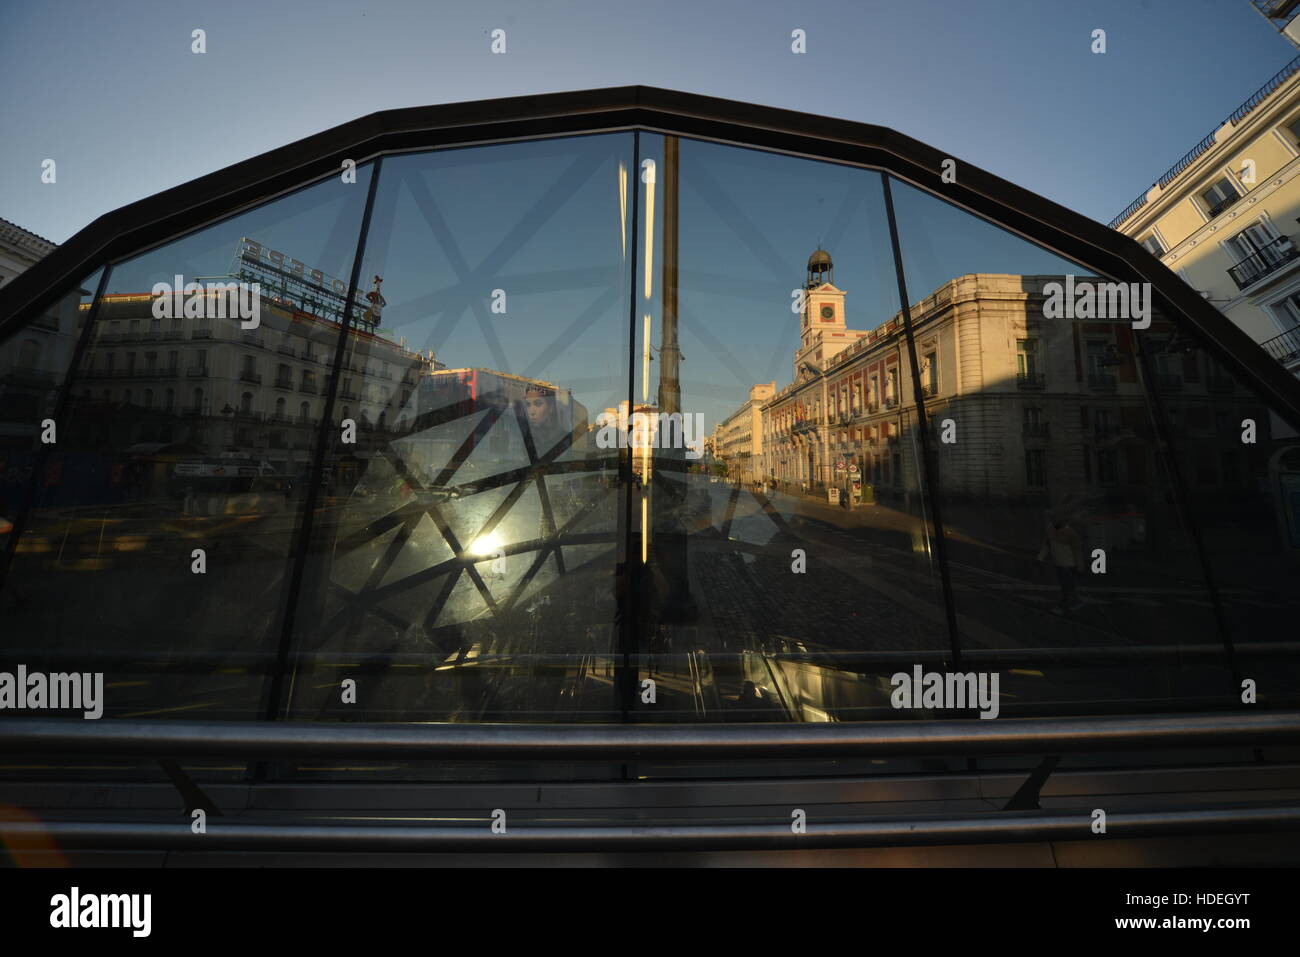 Kilómetro Cero (Km 0), reflected in the glass exit of the Sol public transport station in Puerta del Sol Square, Madrid Stock Photo